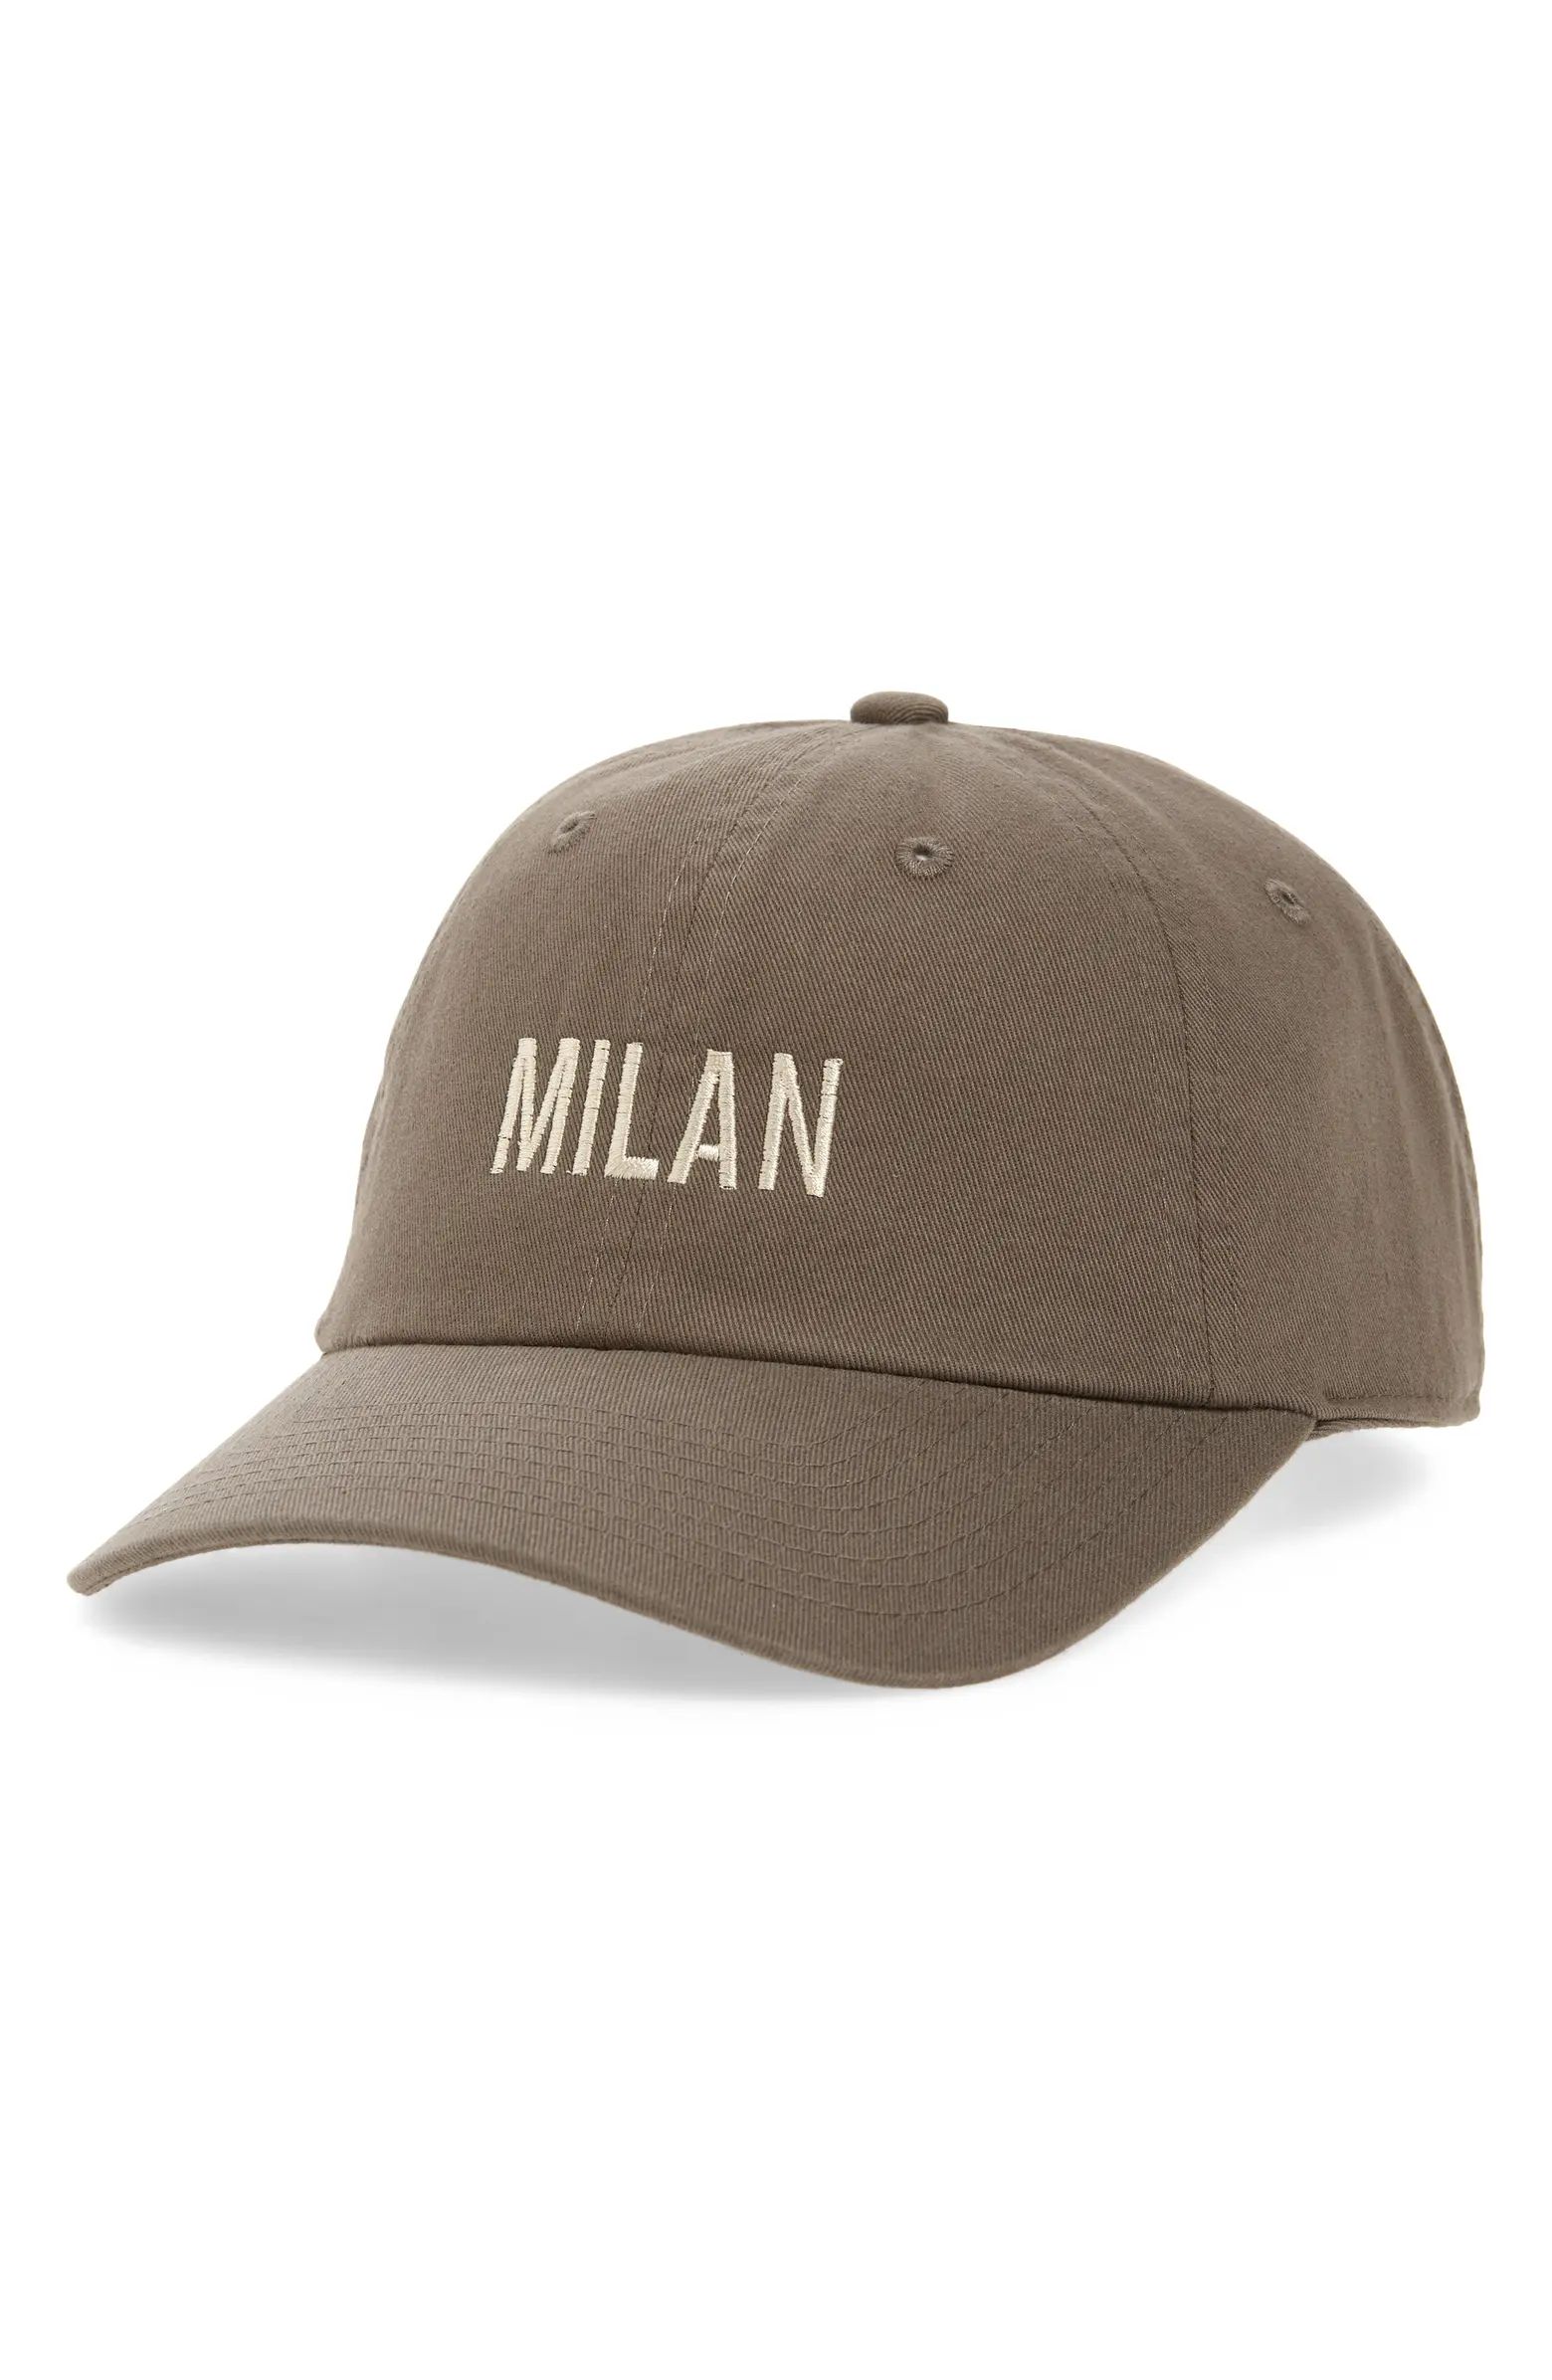 American Needle Slouch Milan Embroidered Baseball Cap | Nordstrom | Nordstrom